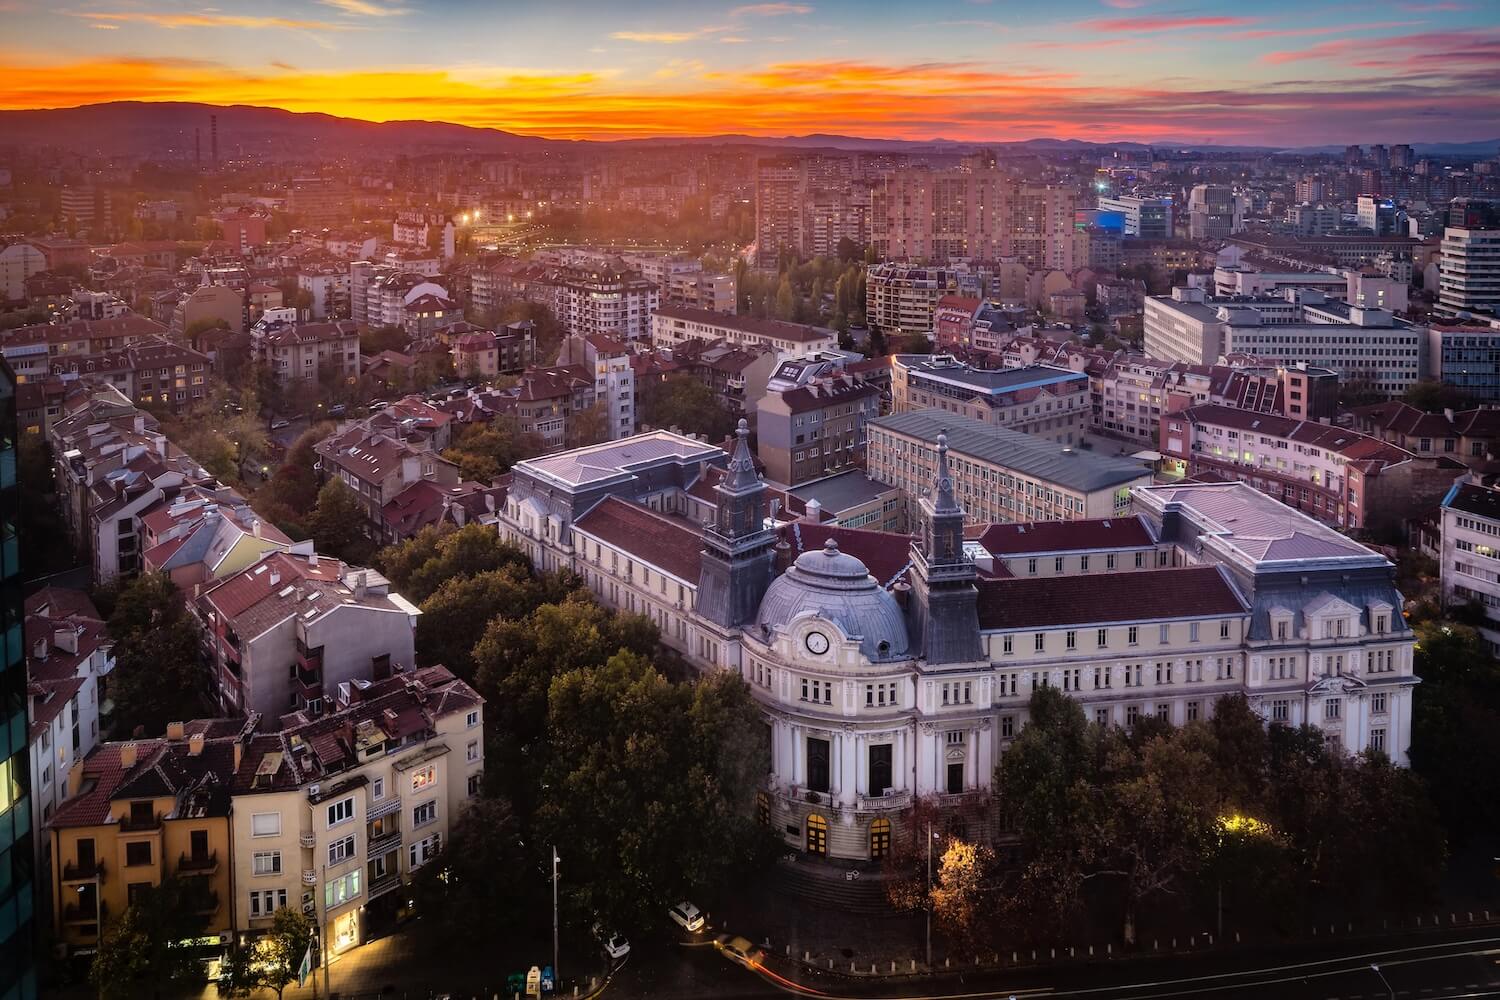 Sunset in sofia